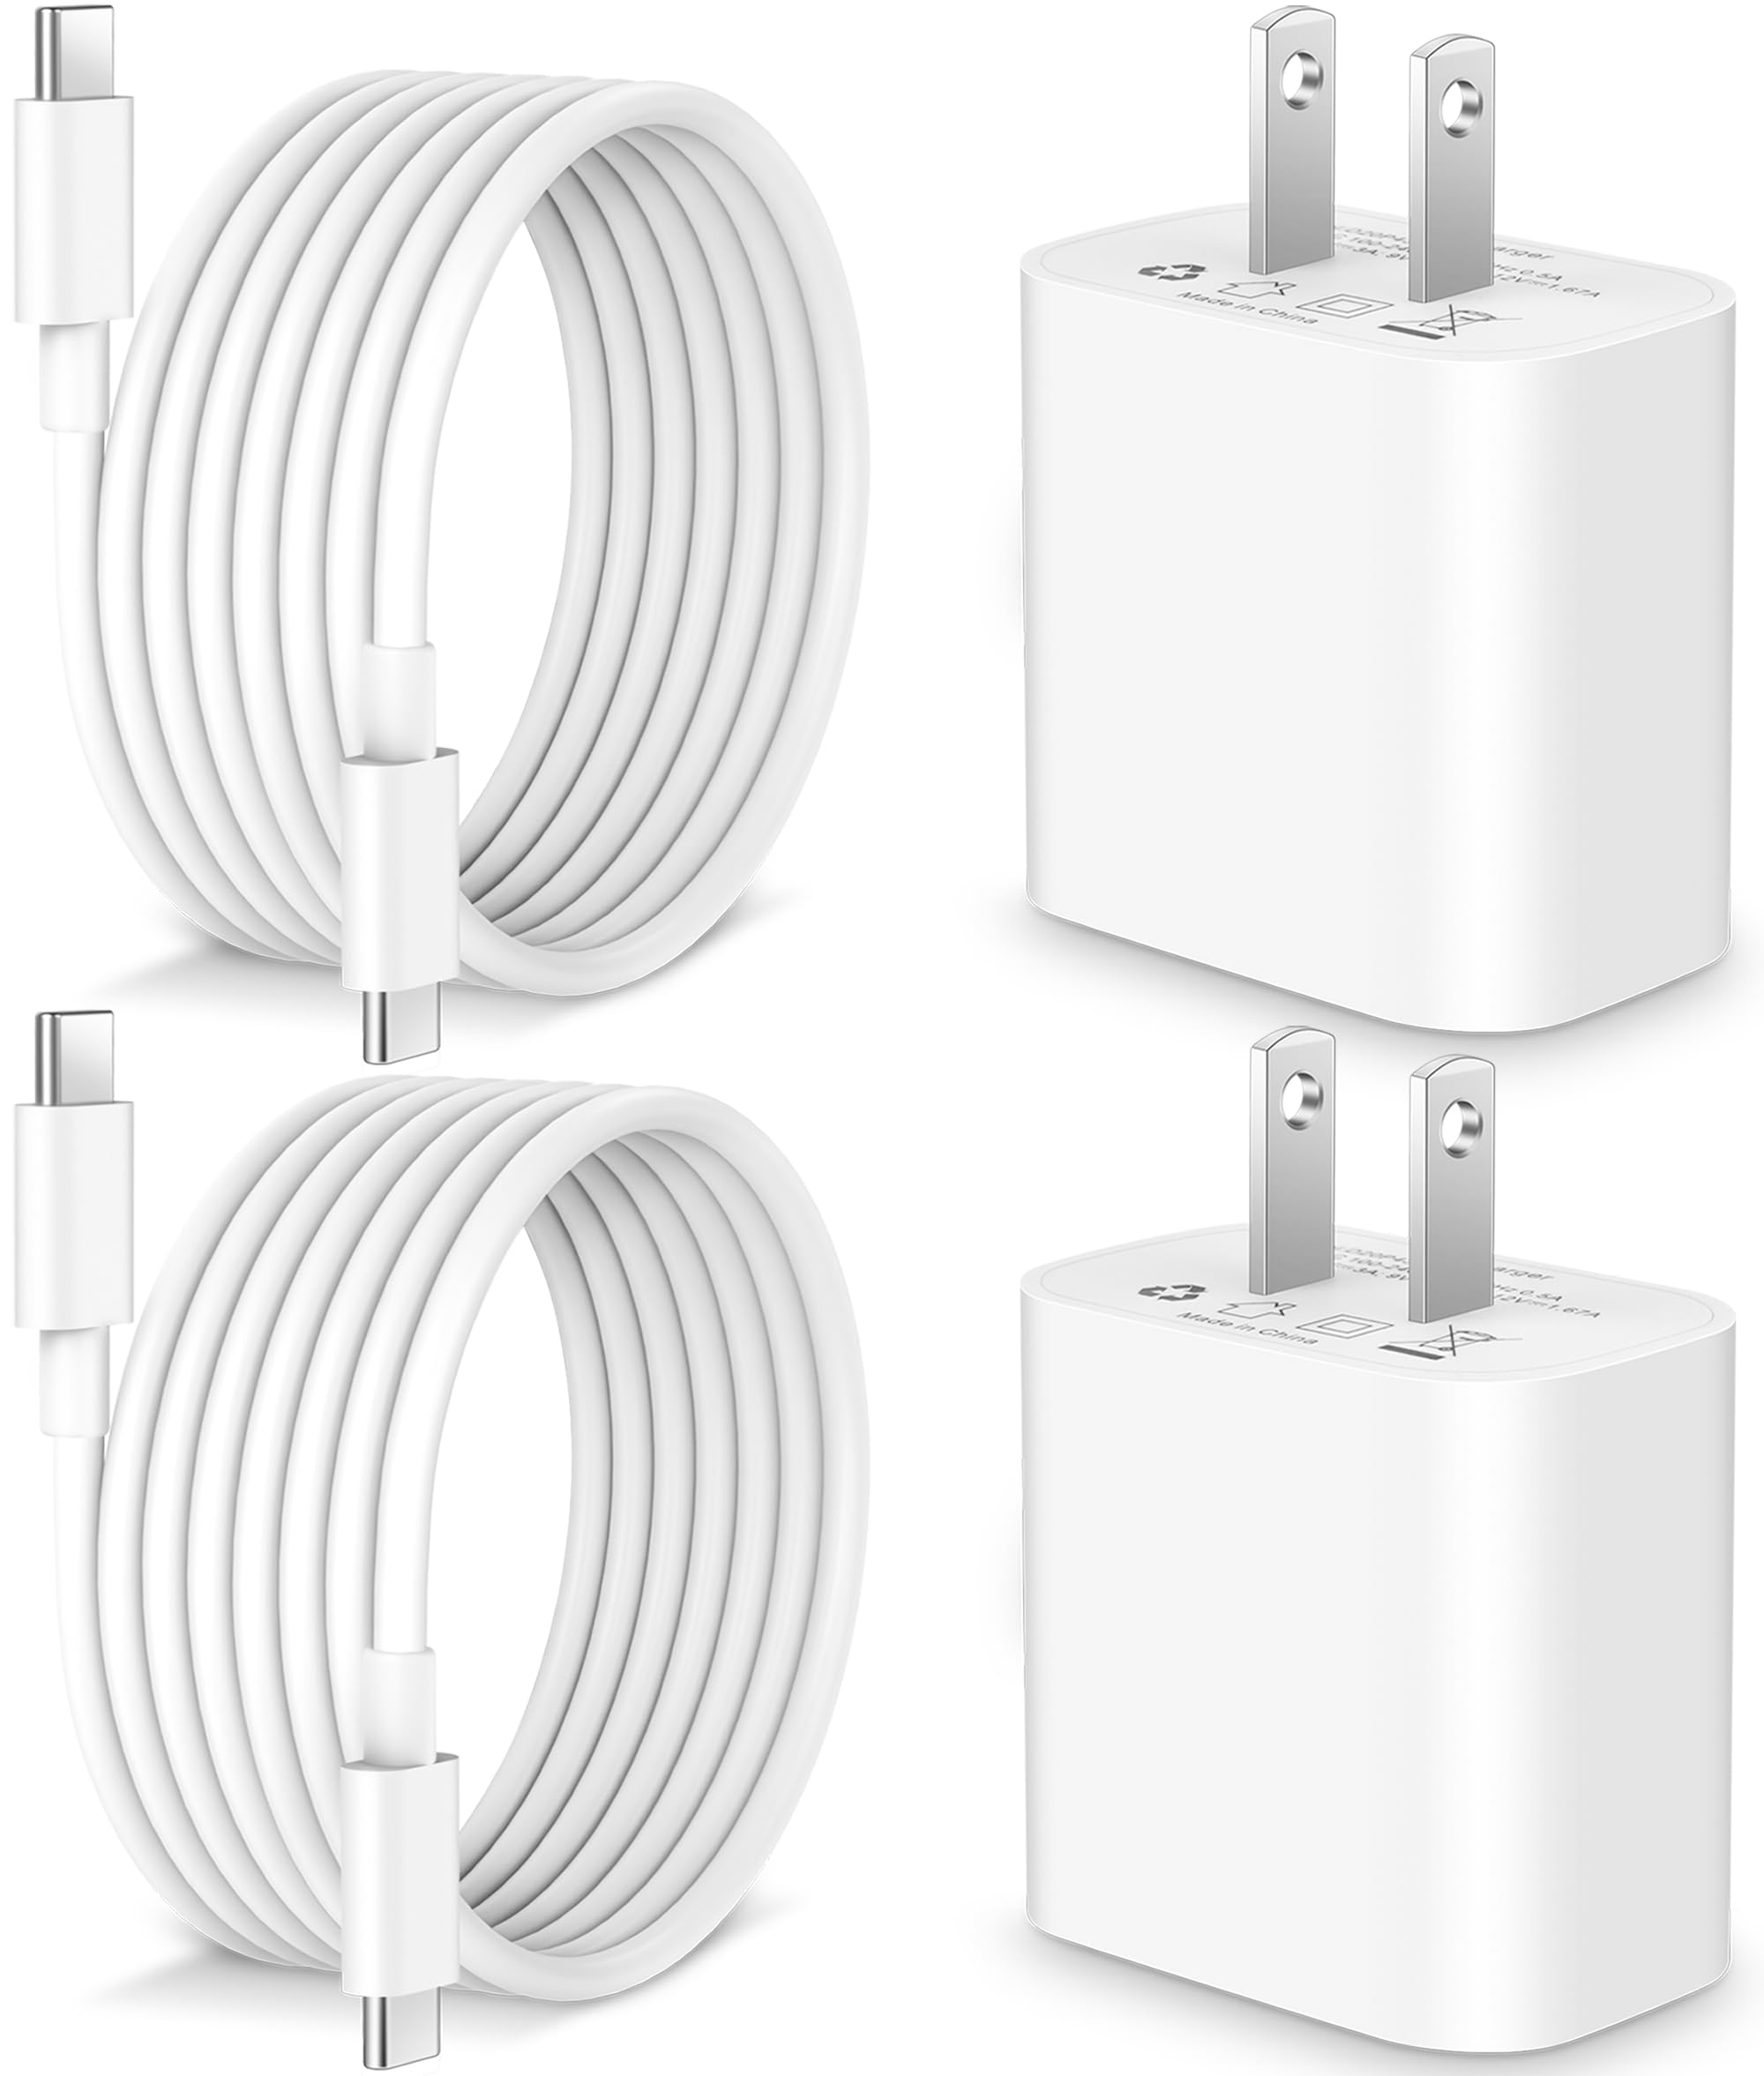 iPhone 15 Charger, 20W USB C Charger with 6.6ft USB C to C Charging Cable  for iPhone 15 Pro/15 Pro Max/15 Plus, iPad Pro 12.9/11 inch, iPad Air 5/4